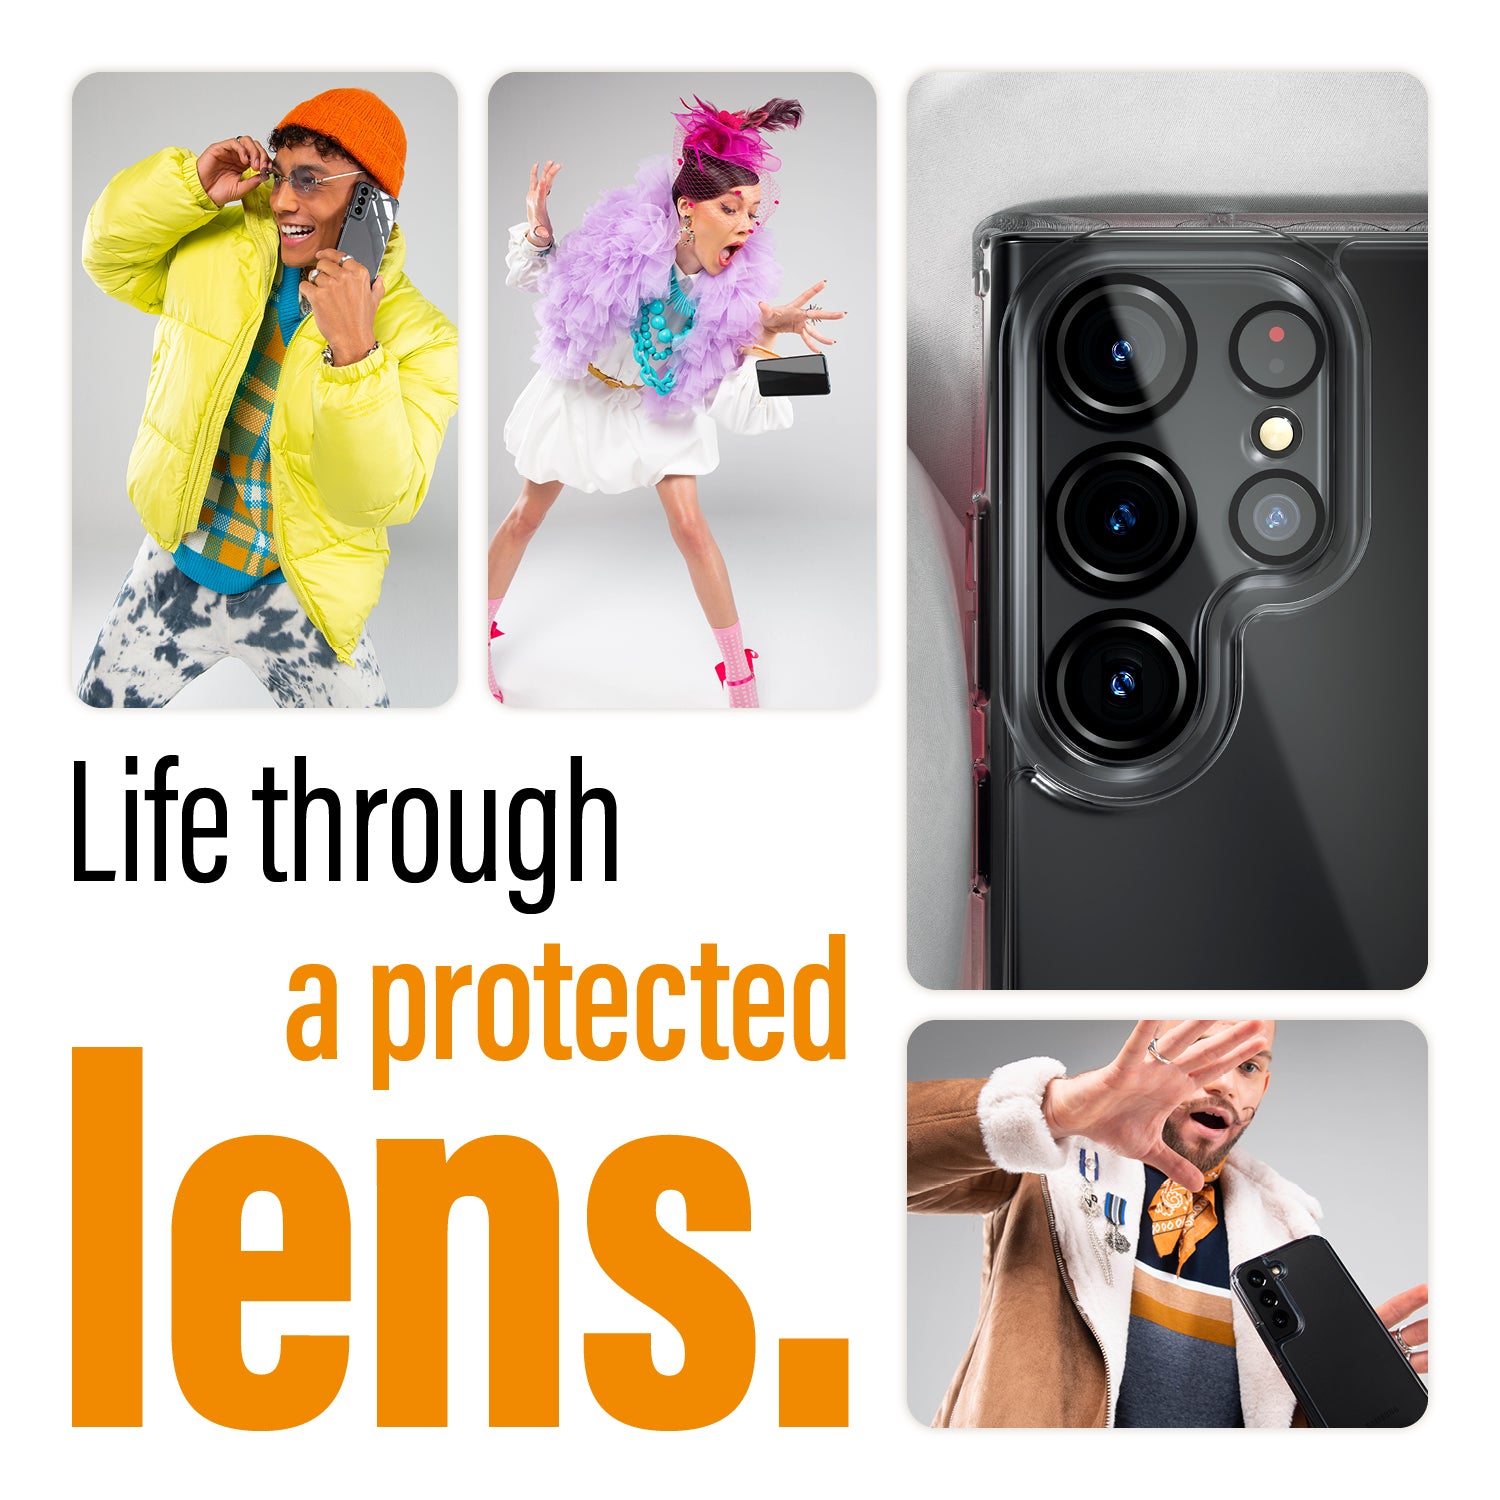 PanzerGlass™ PicturePerfect Camera Lens Protector for Samsung Galaxy S23 Ultra.